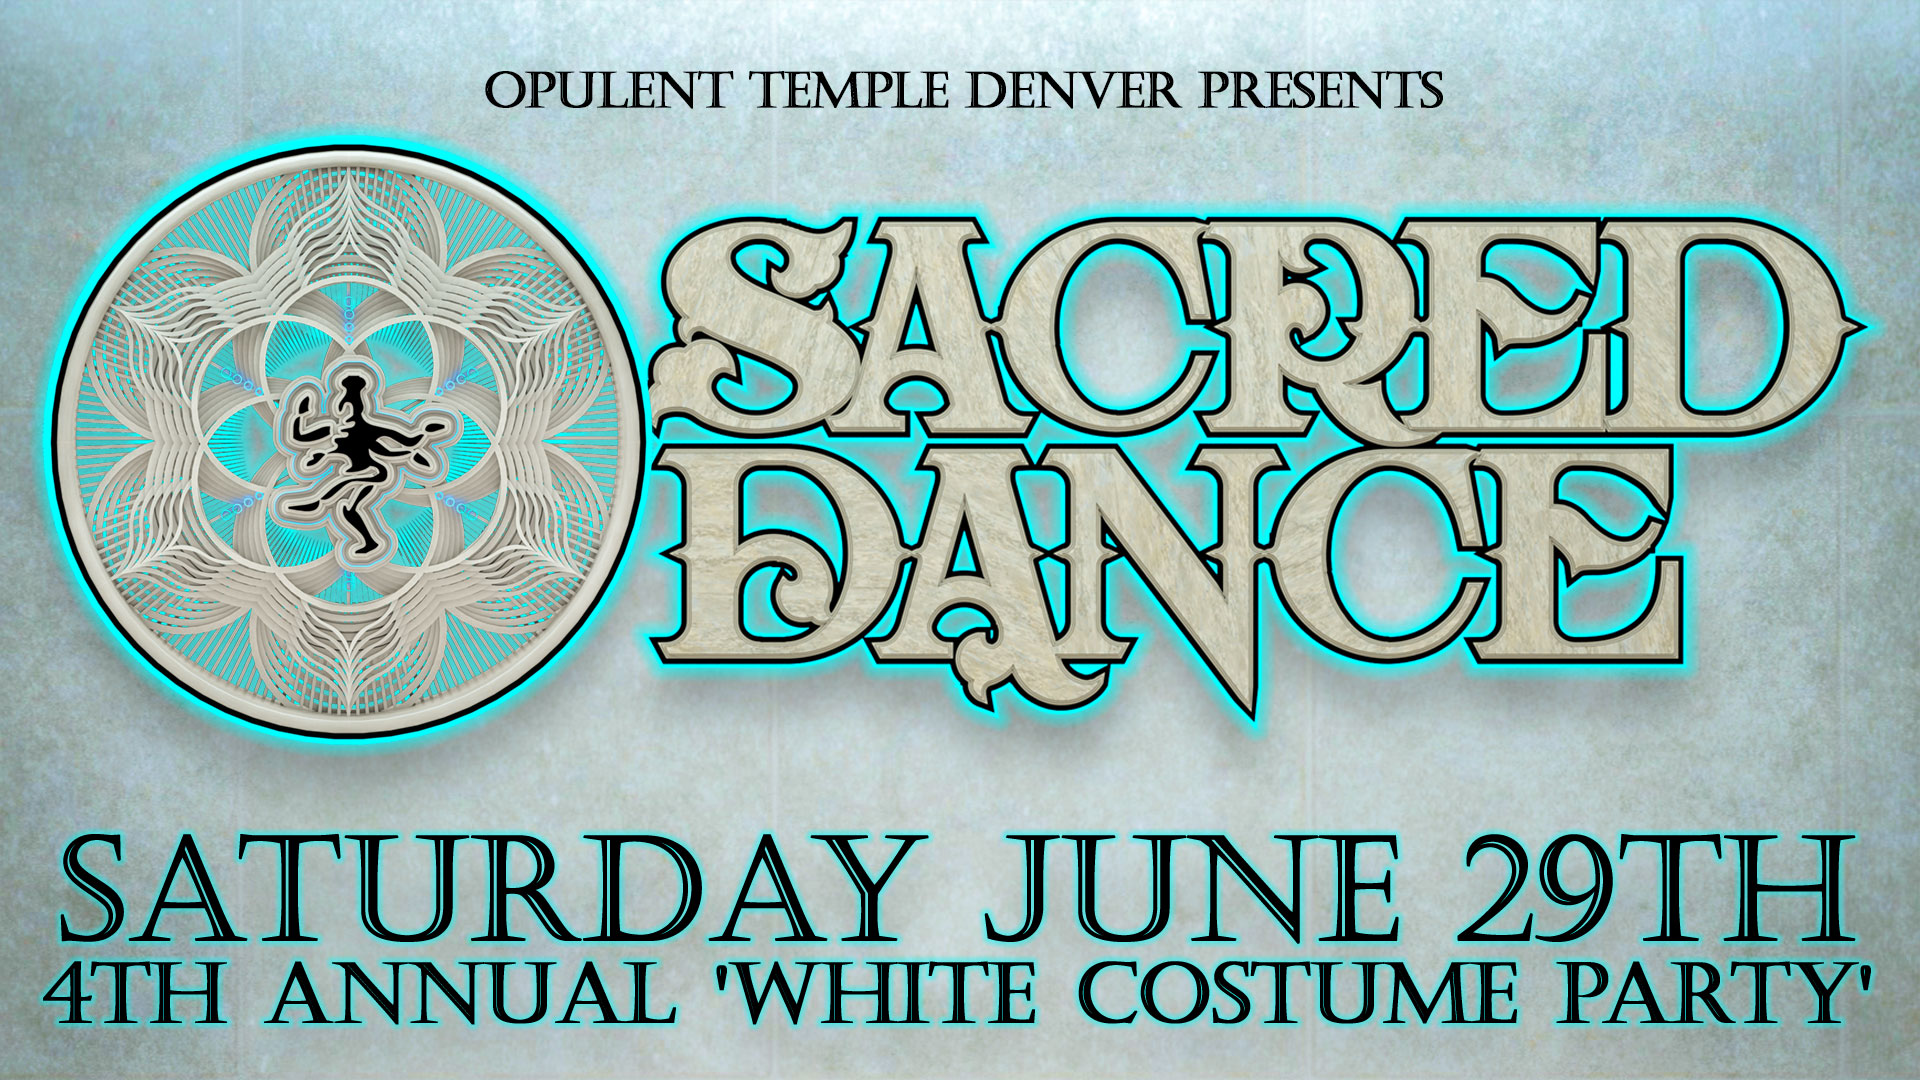 Opulent Temple Denver presents: Sacred Dance Our 4th Annual 'white costume party' in Denver